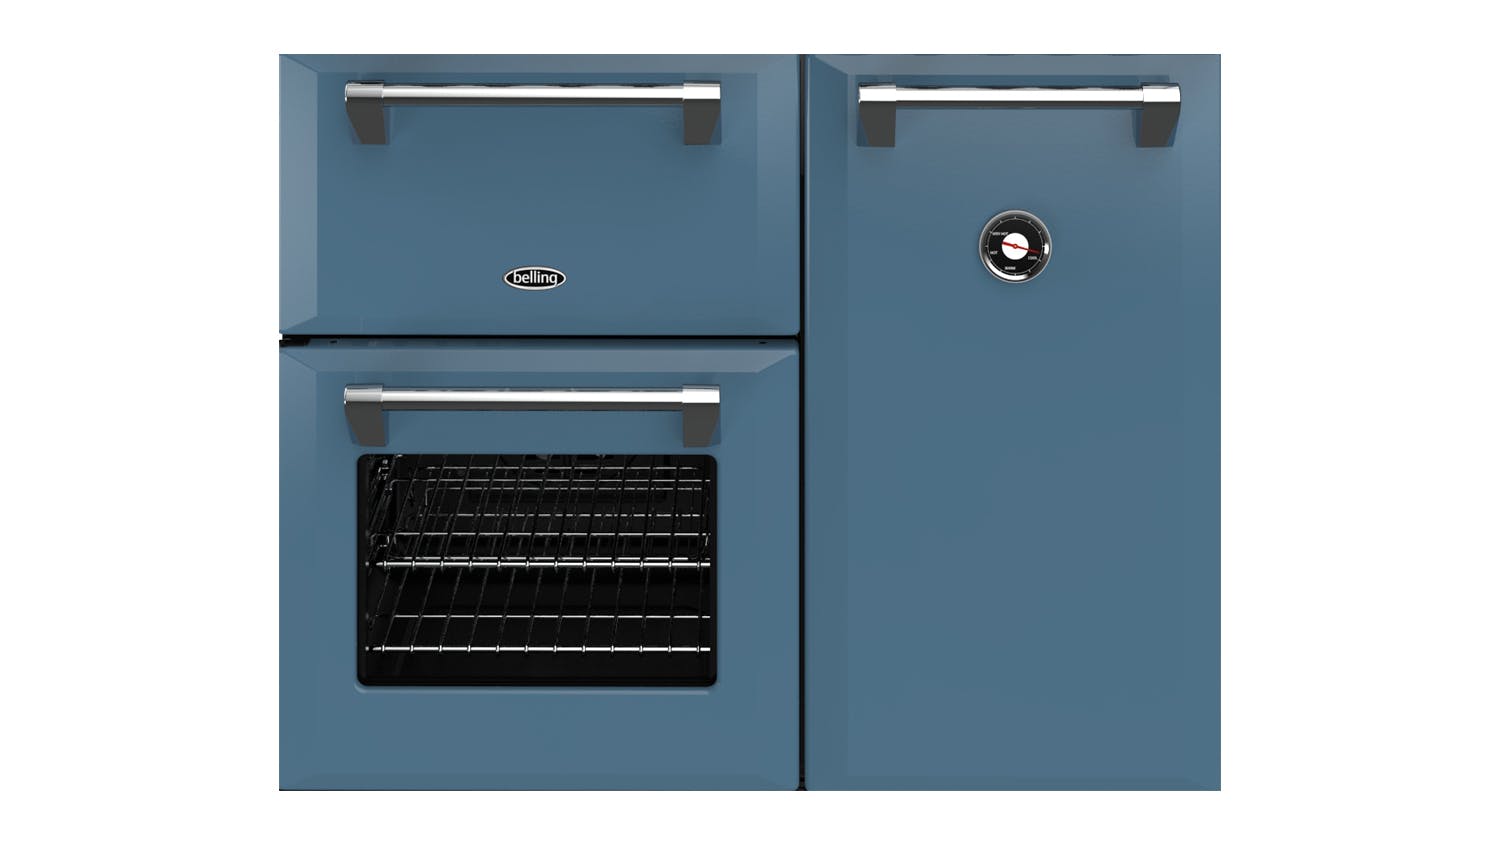 Belling 90cm Freestanding Oven with Induction Cooktop - Thunder Blue (Colour Boutique/BRD900ITB)